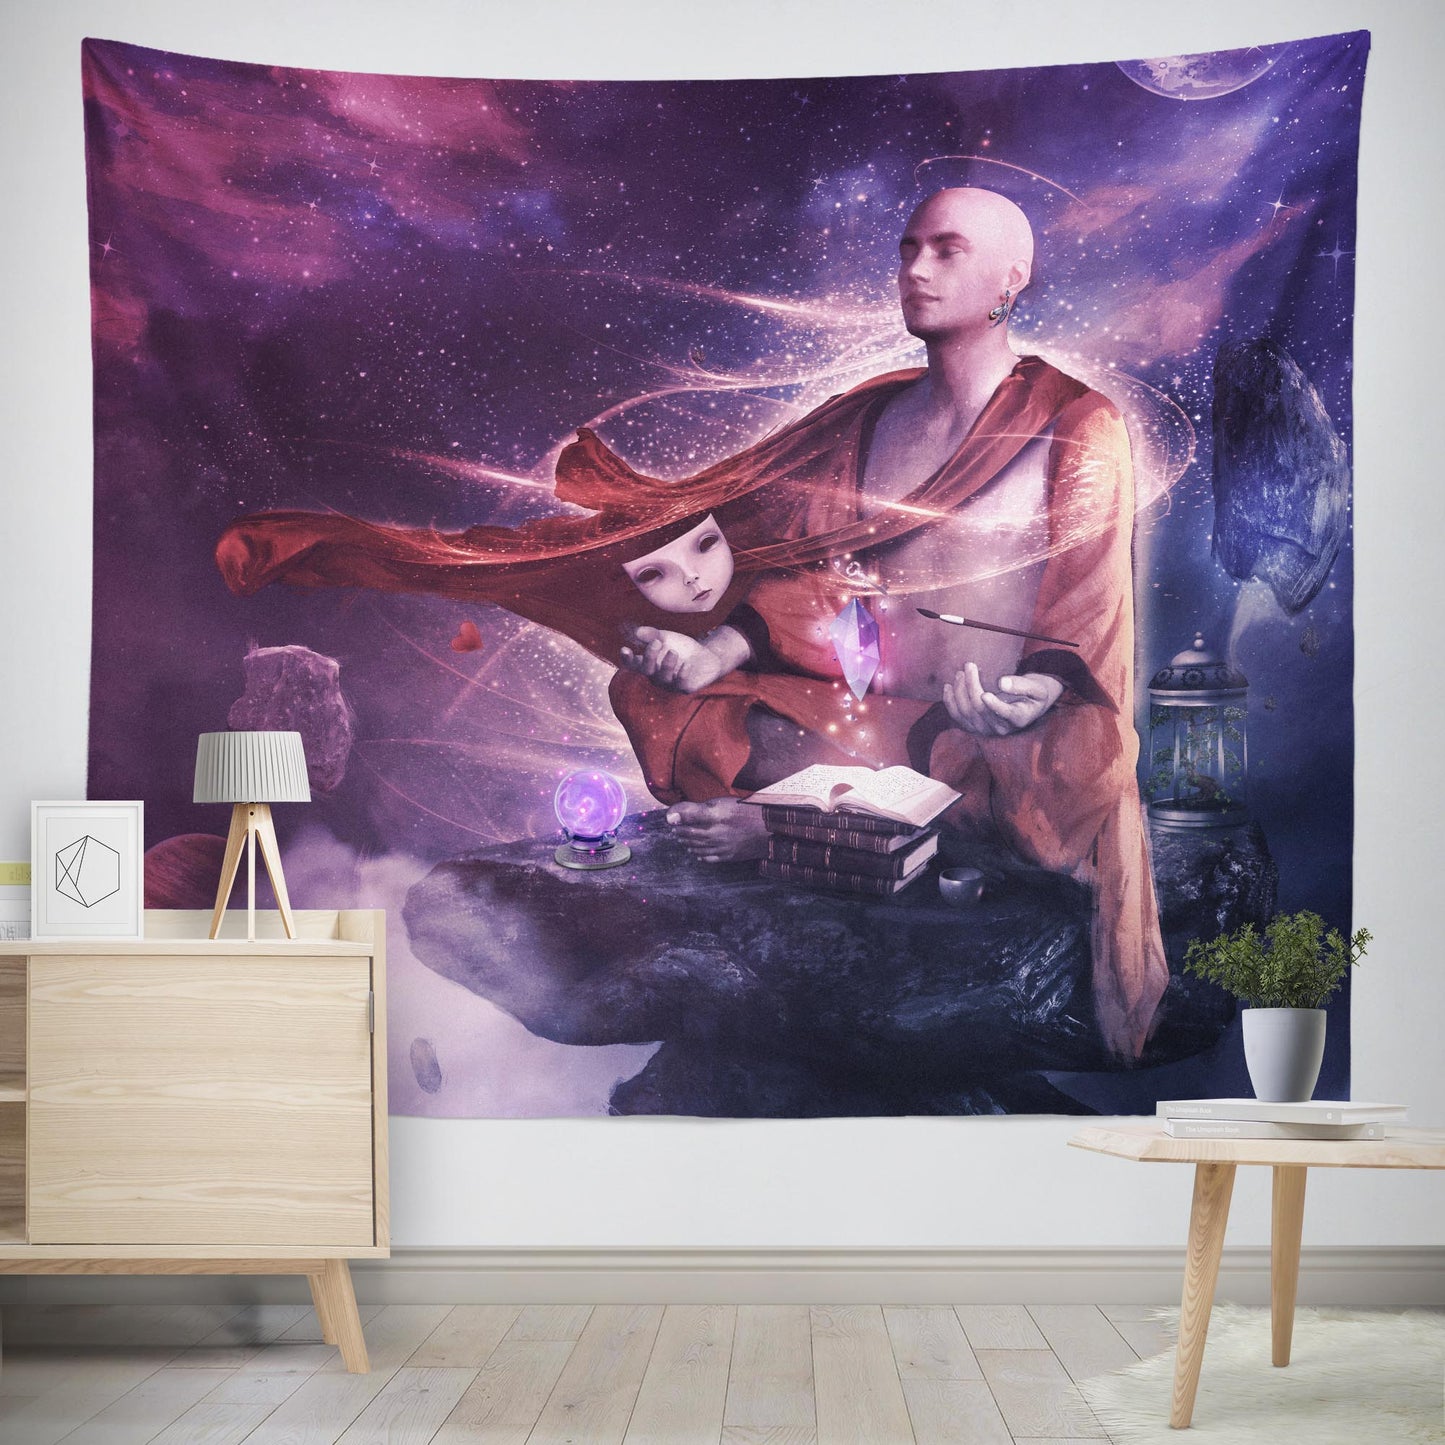 magical meditating buddhist monk performing ritual, extra large wall art tapestry